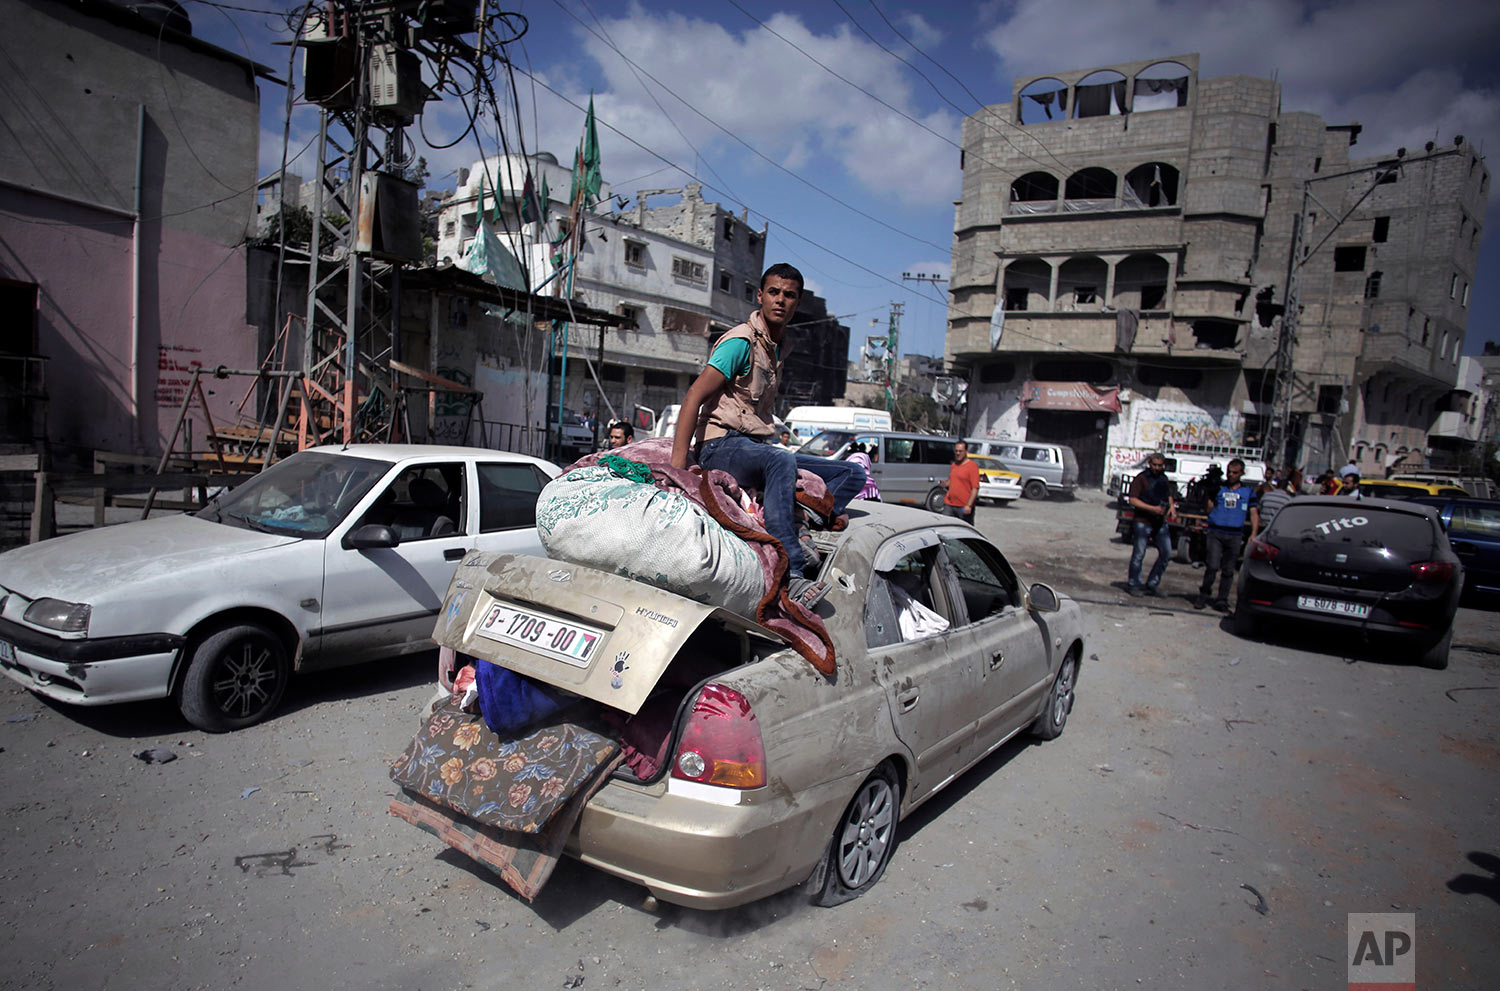  In this July 26, 2014 photo, Palestinians salvage what little of their belongings they could from their homes during a 12-hour cease-fire in Gaza City's Shijaiyah neighborhood. (AP Photo/Khalil Hamra) 